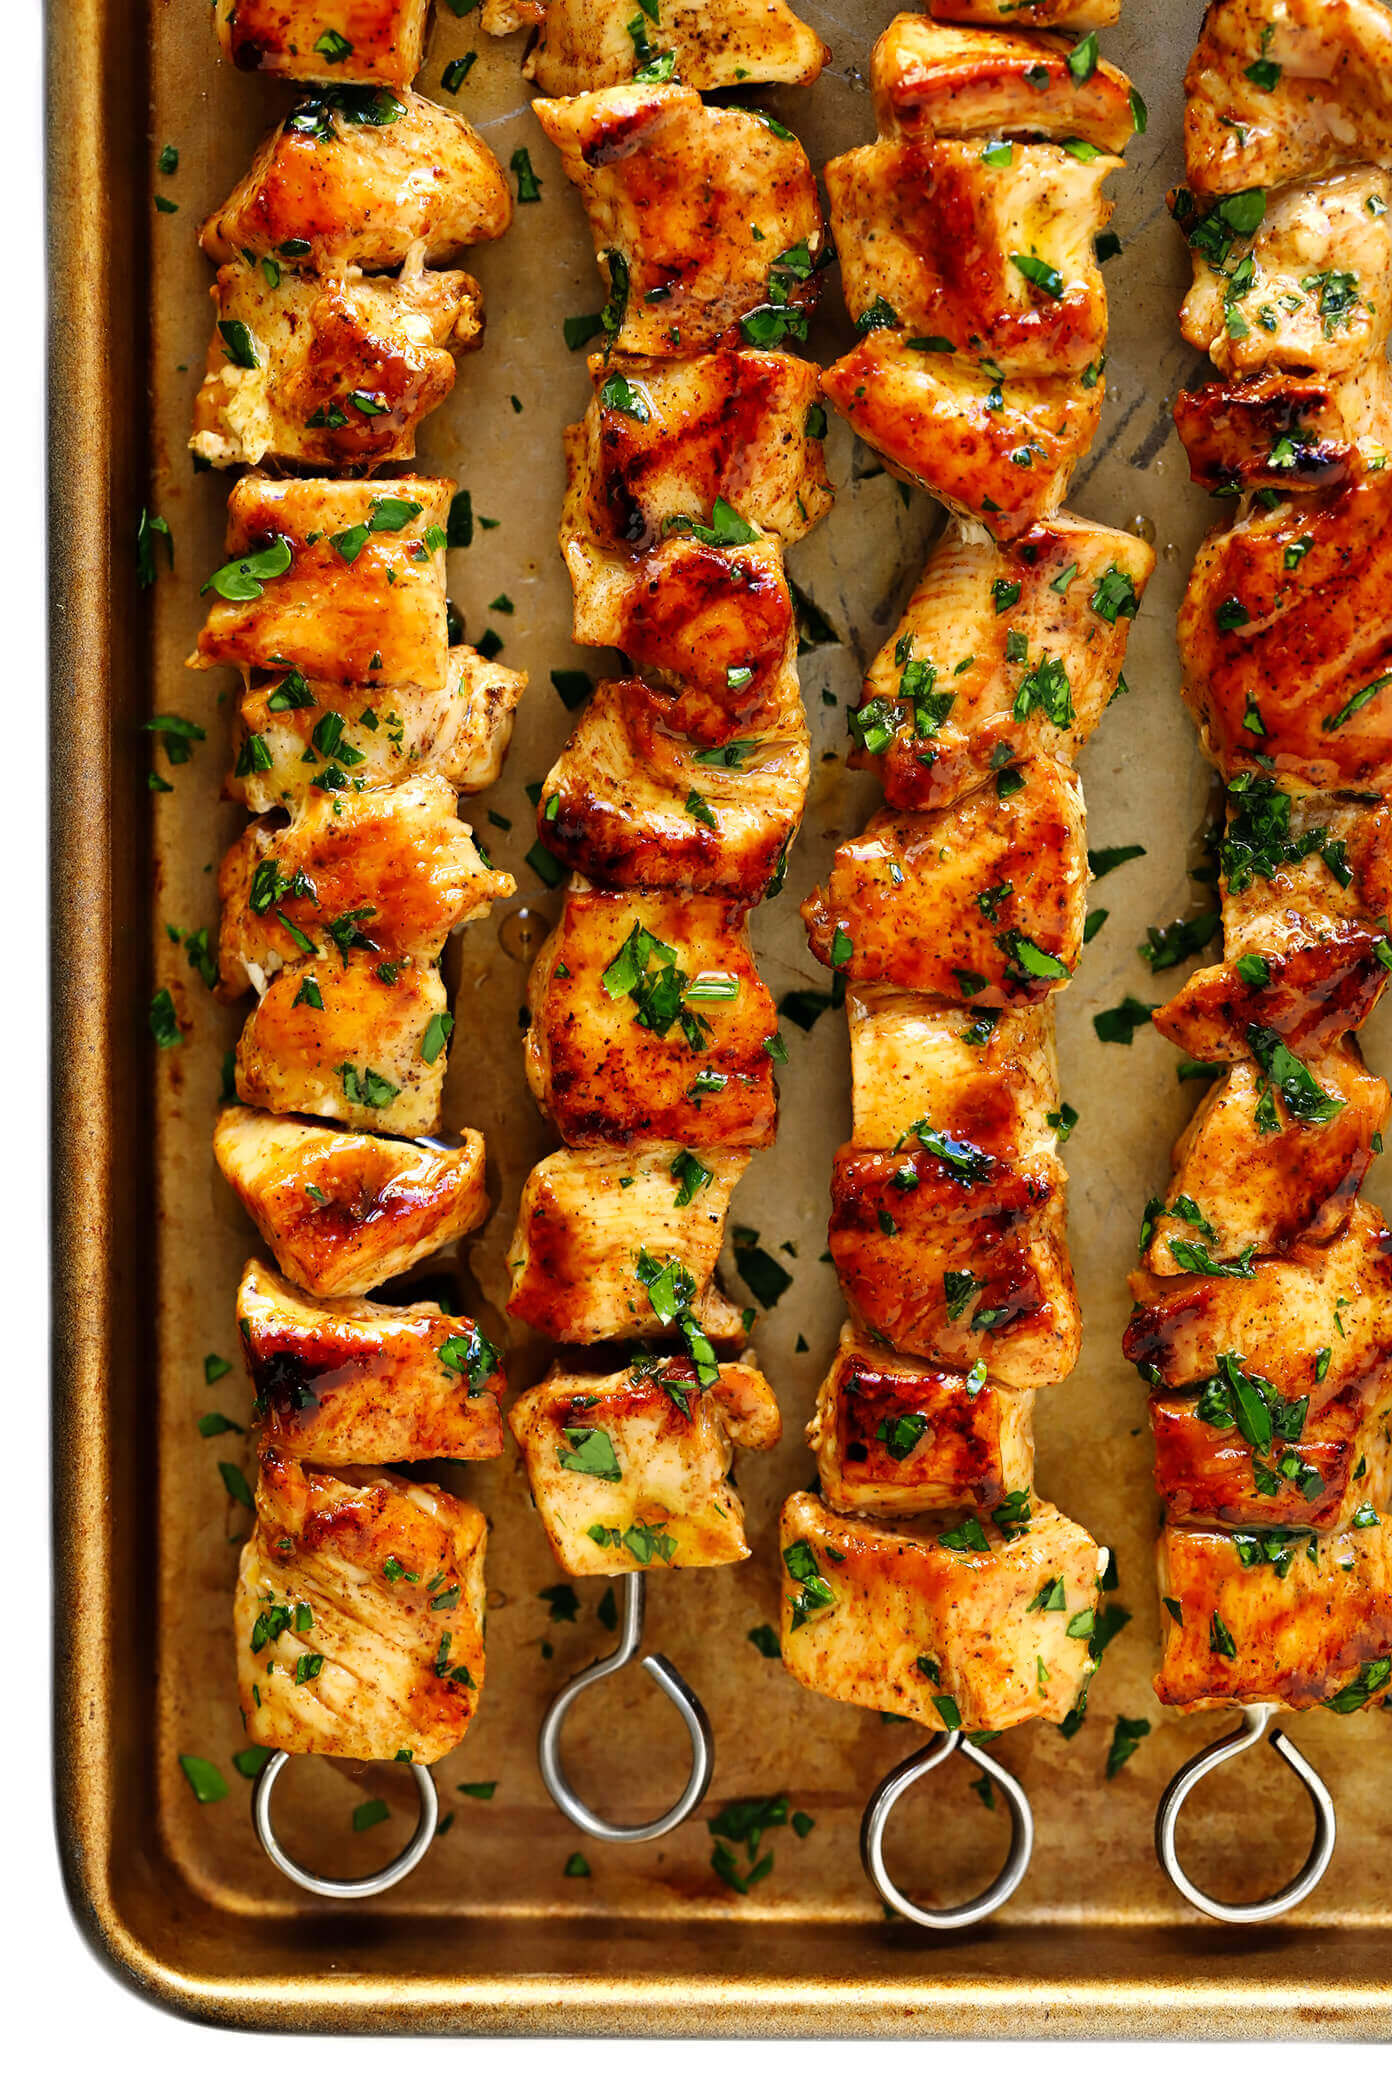 The Juiciest Grilled Chicken Kabobs via Gimme Some Oven. Level up your summer fun with some of the best BBQ and grilling recipes of all time! If you're looking for some easy + healthy BBQ recipes, grilled chicken or meat for a crowd, we've got you covered. Check out our over 30 summer BBQ recipes for you to try!